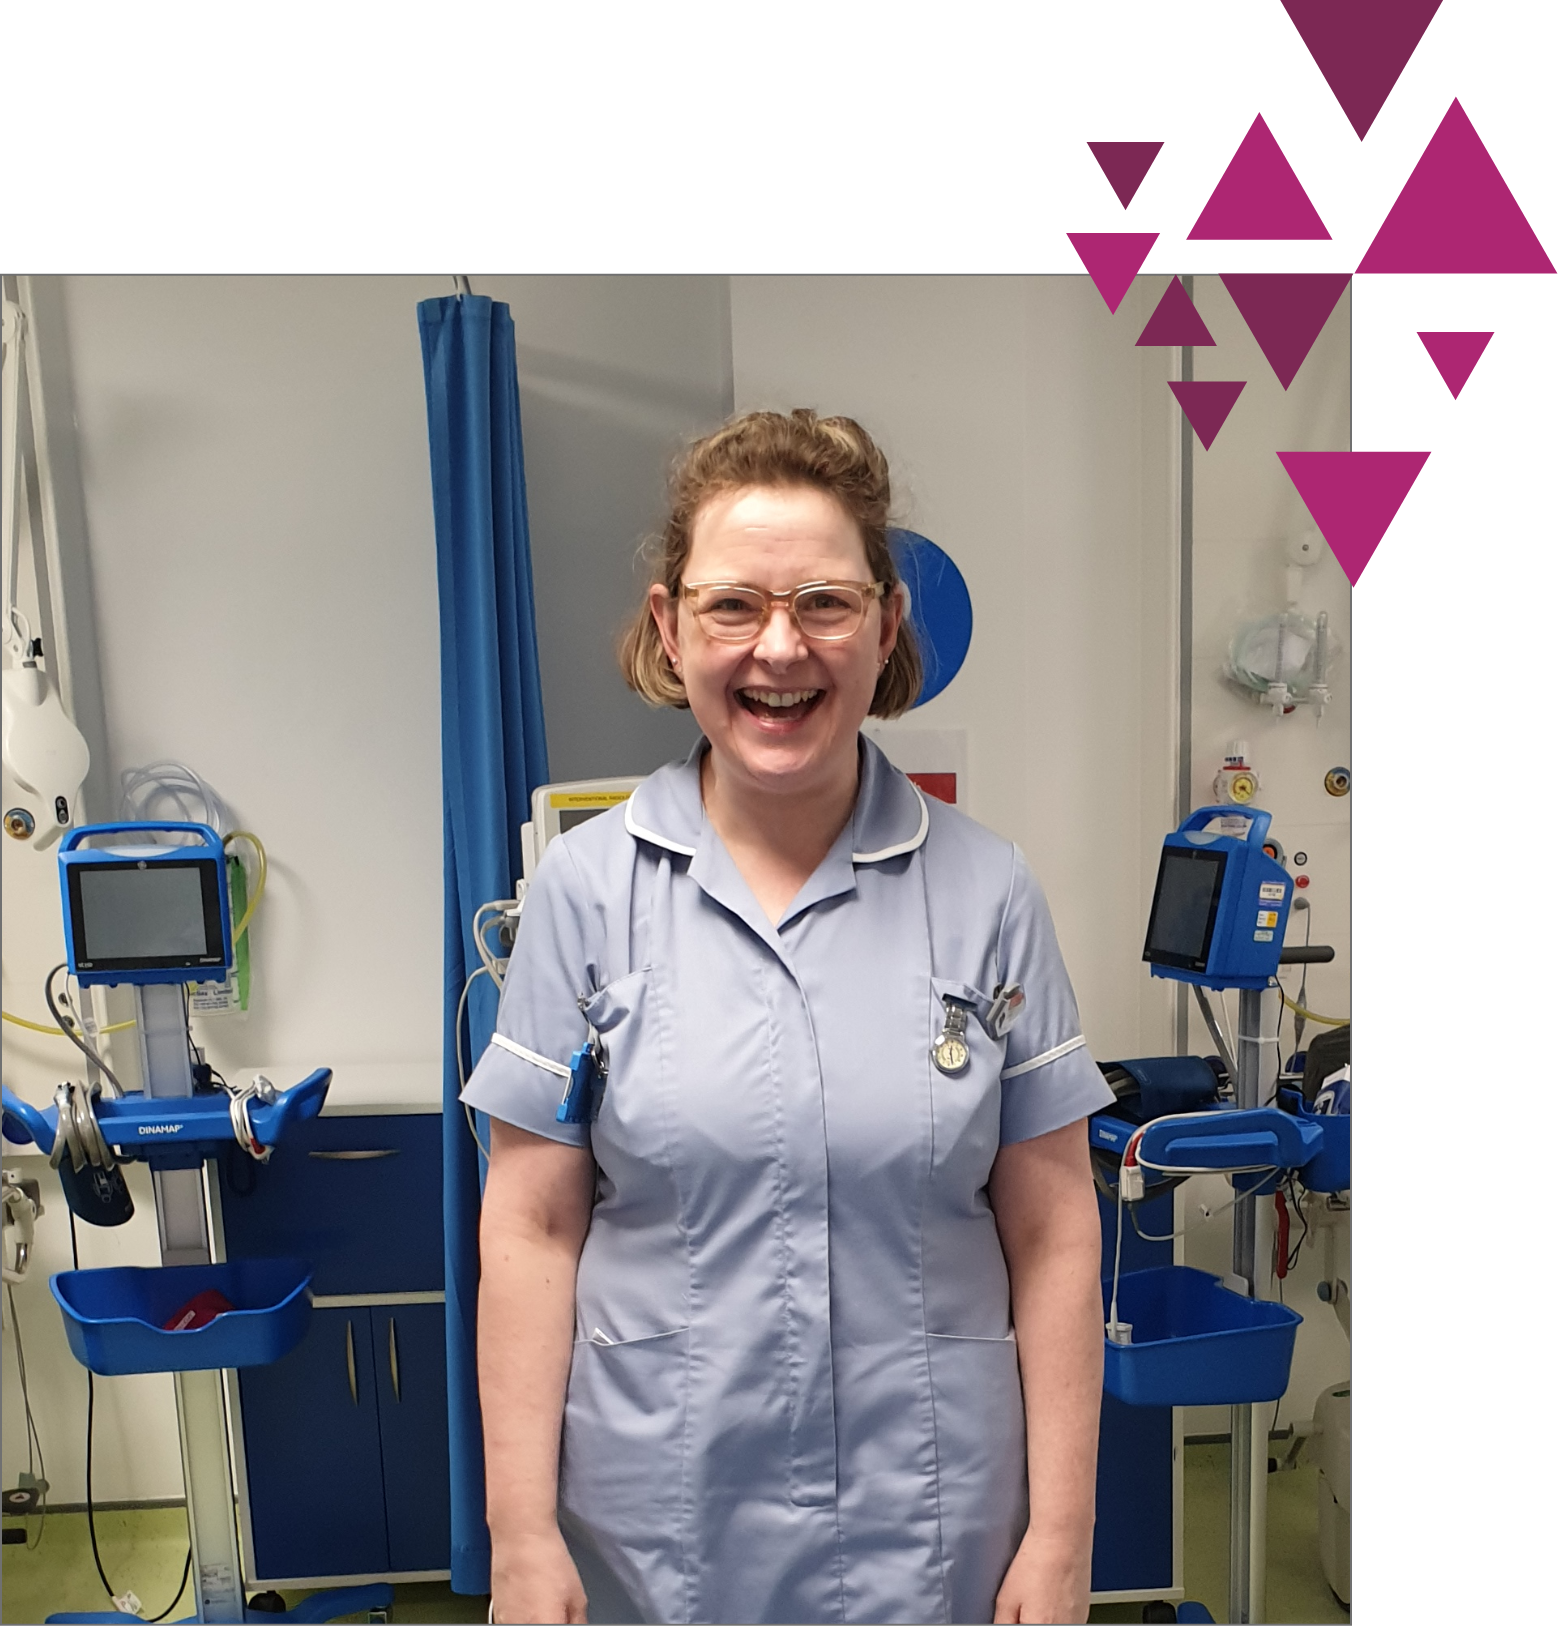 A smiling female nurse in a blue uniform standing in a hospital room with medical equipment in the background. bright pink geometric shapes appear at the top right.